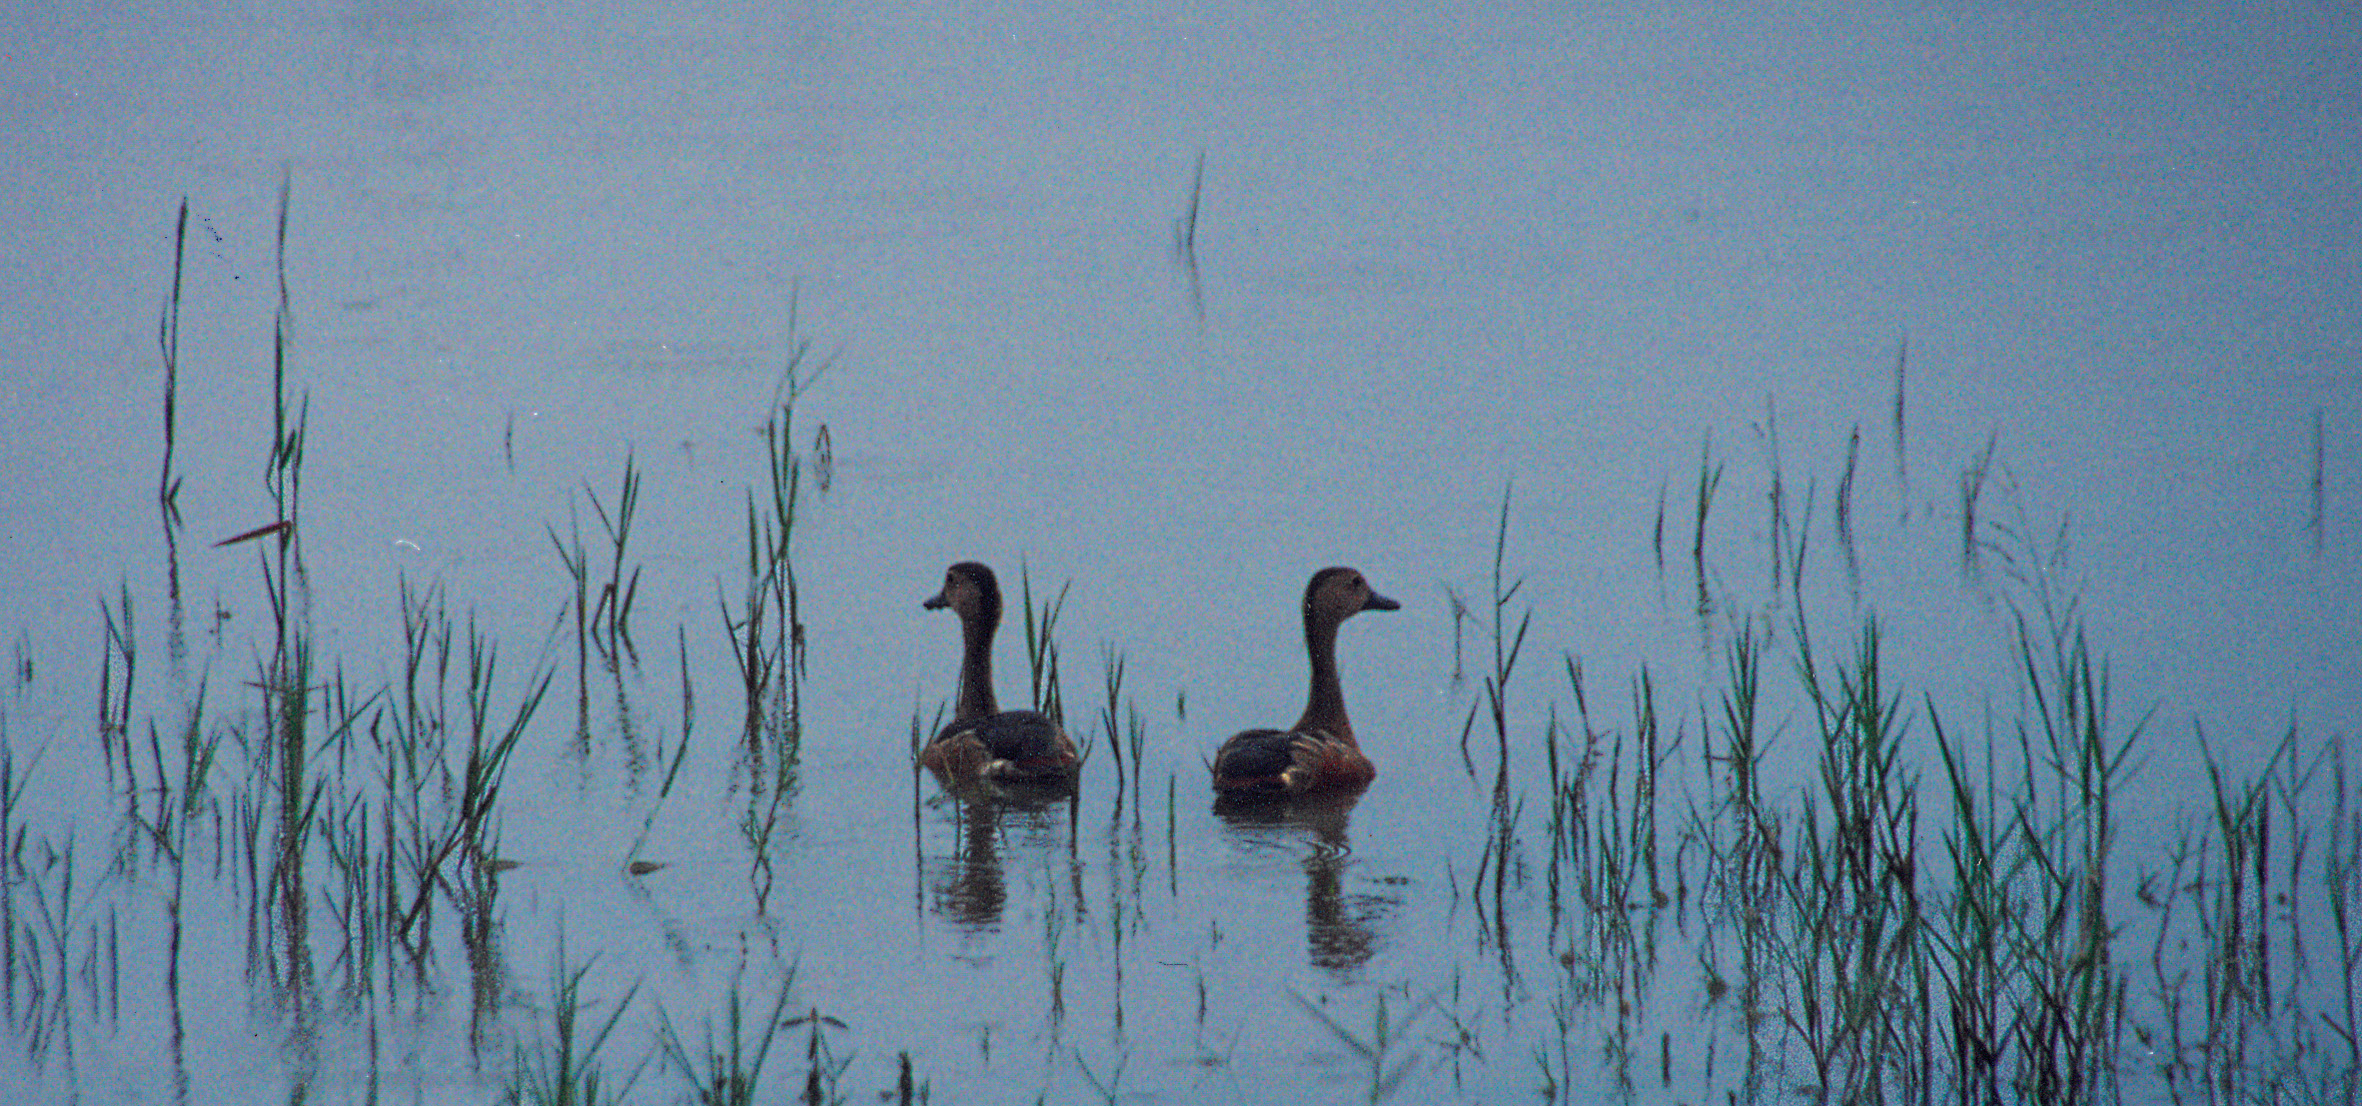 two birds are swimming in the water by some tall grass